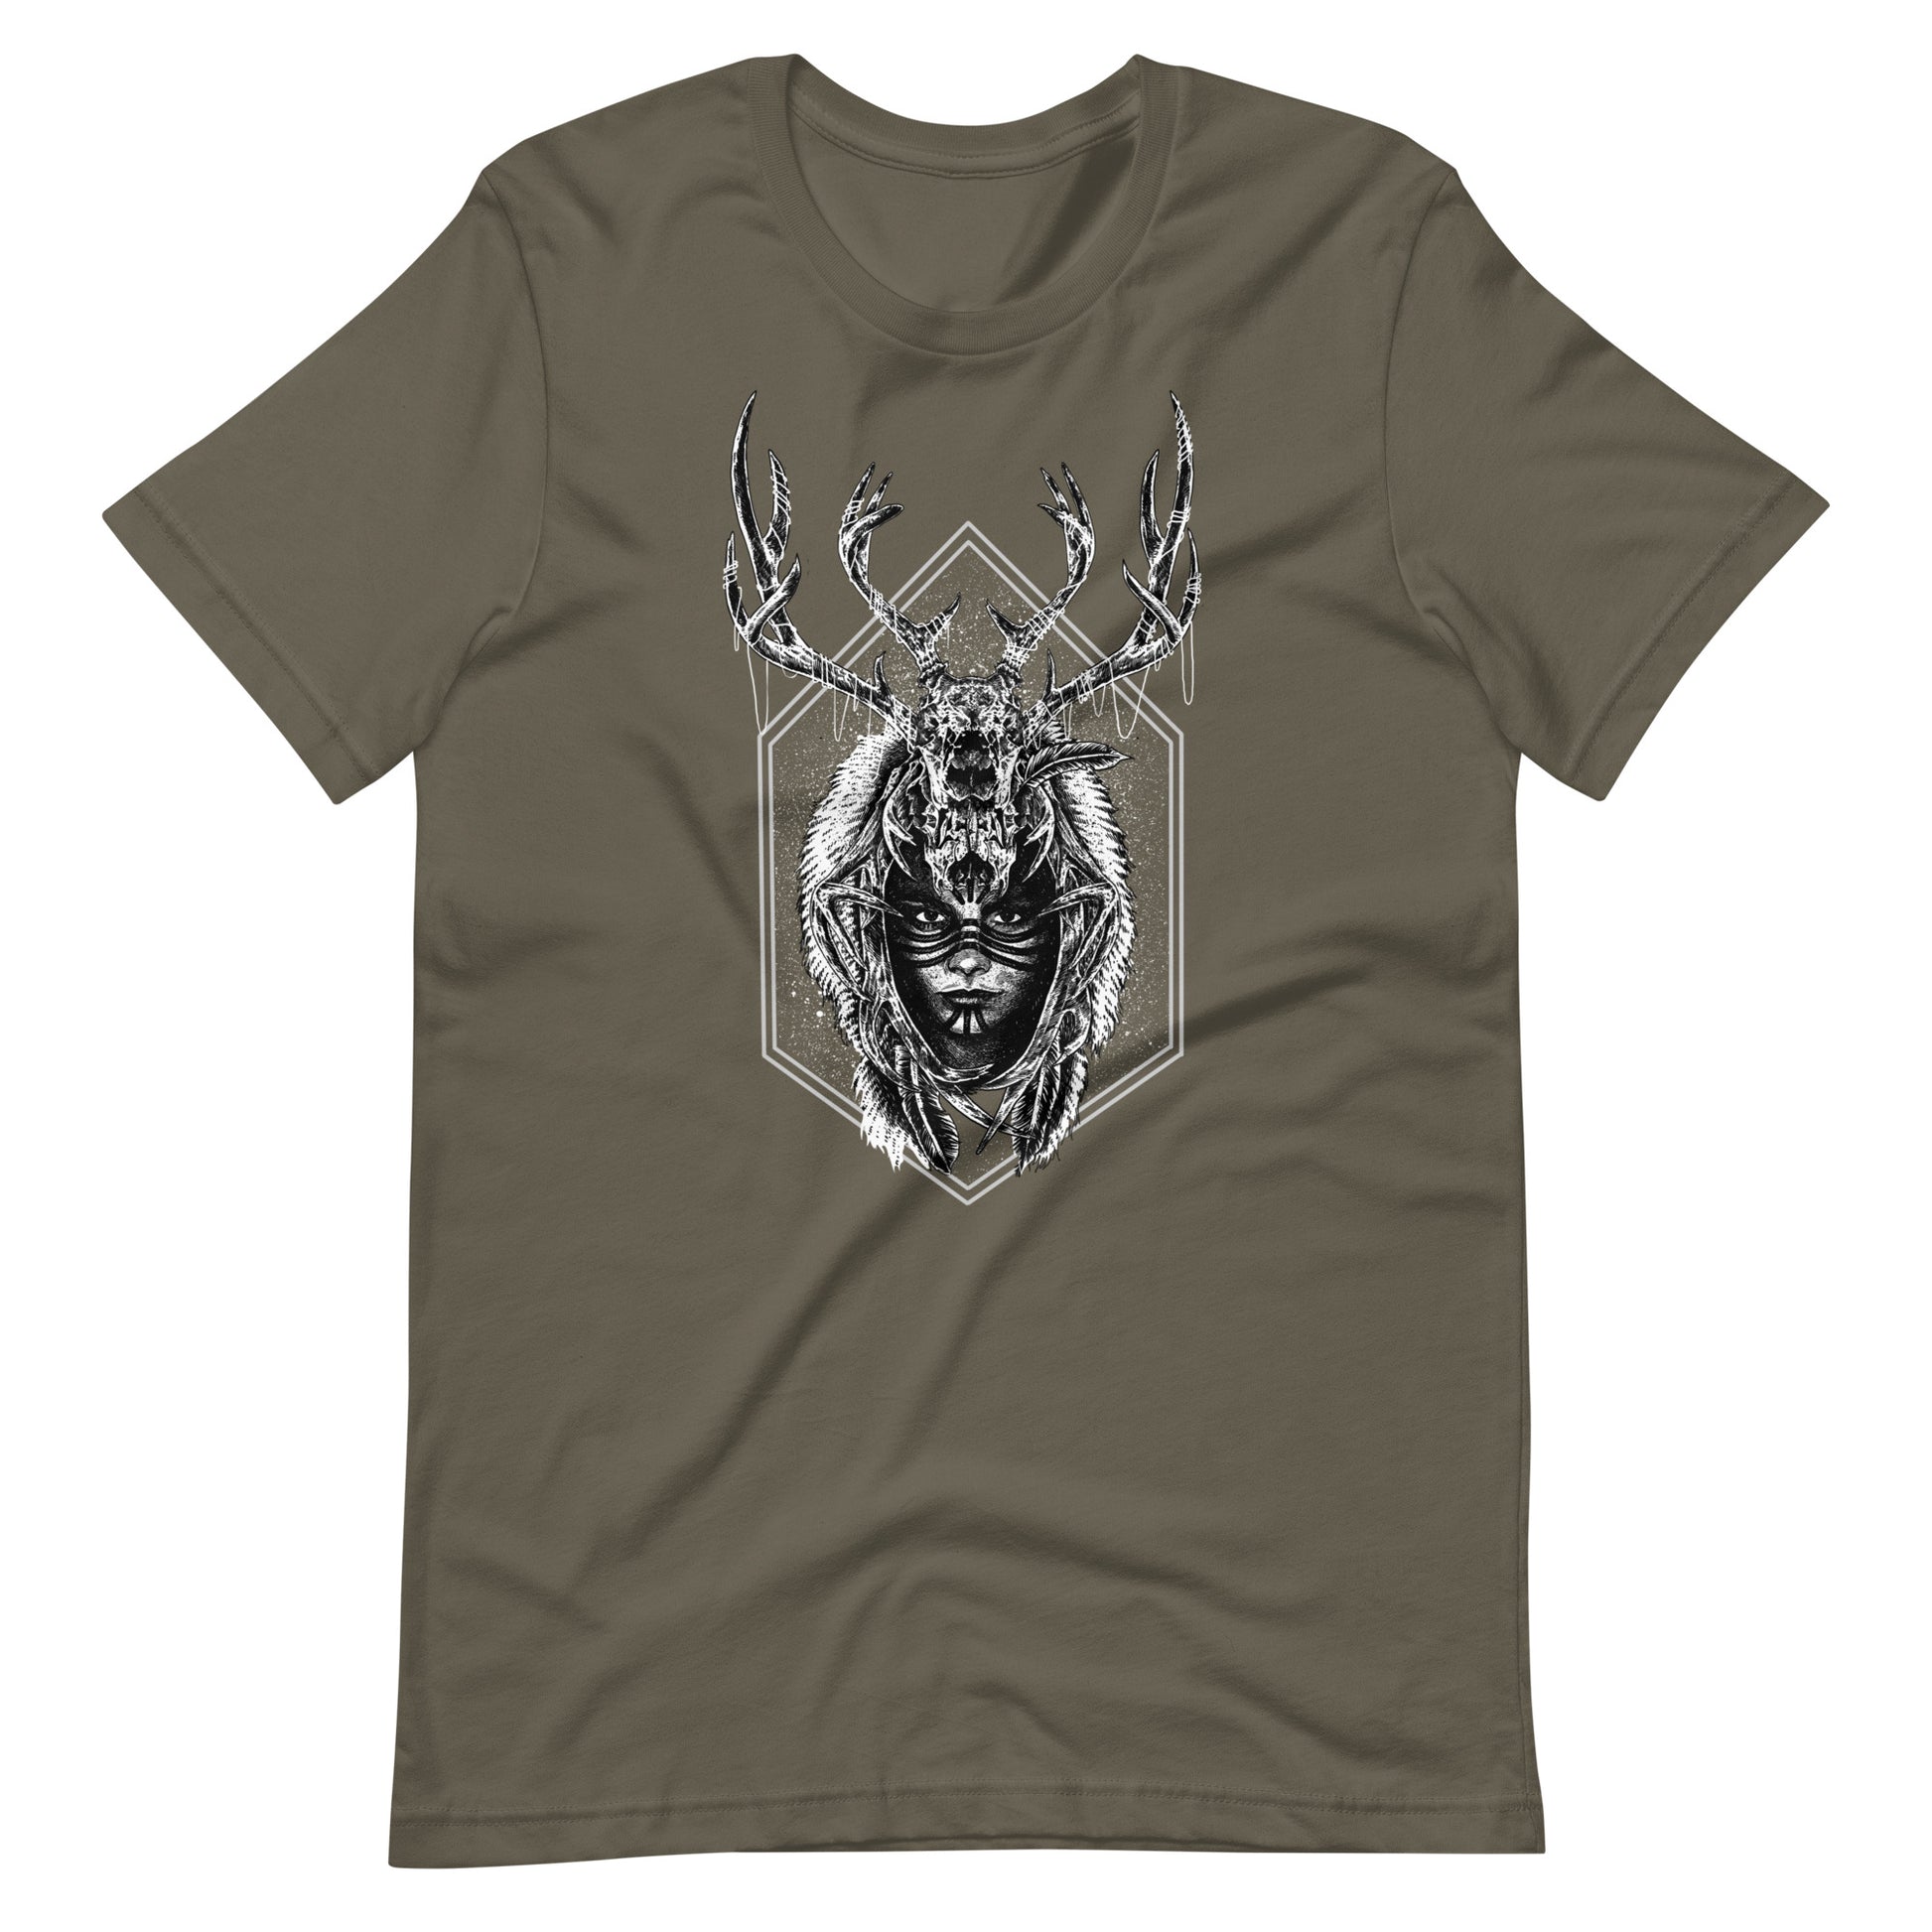 The Ruler - Men's t-shirt - Army Front